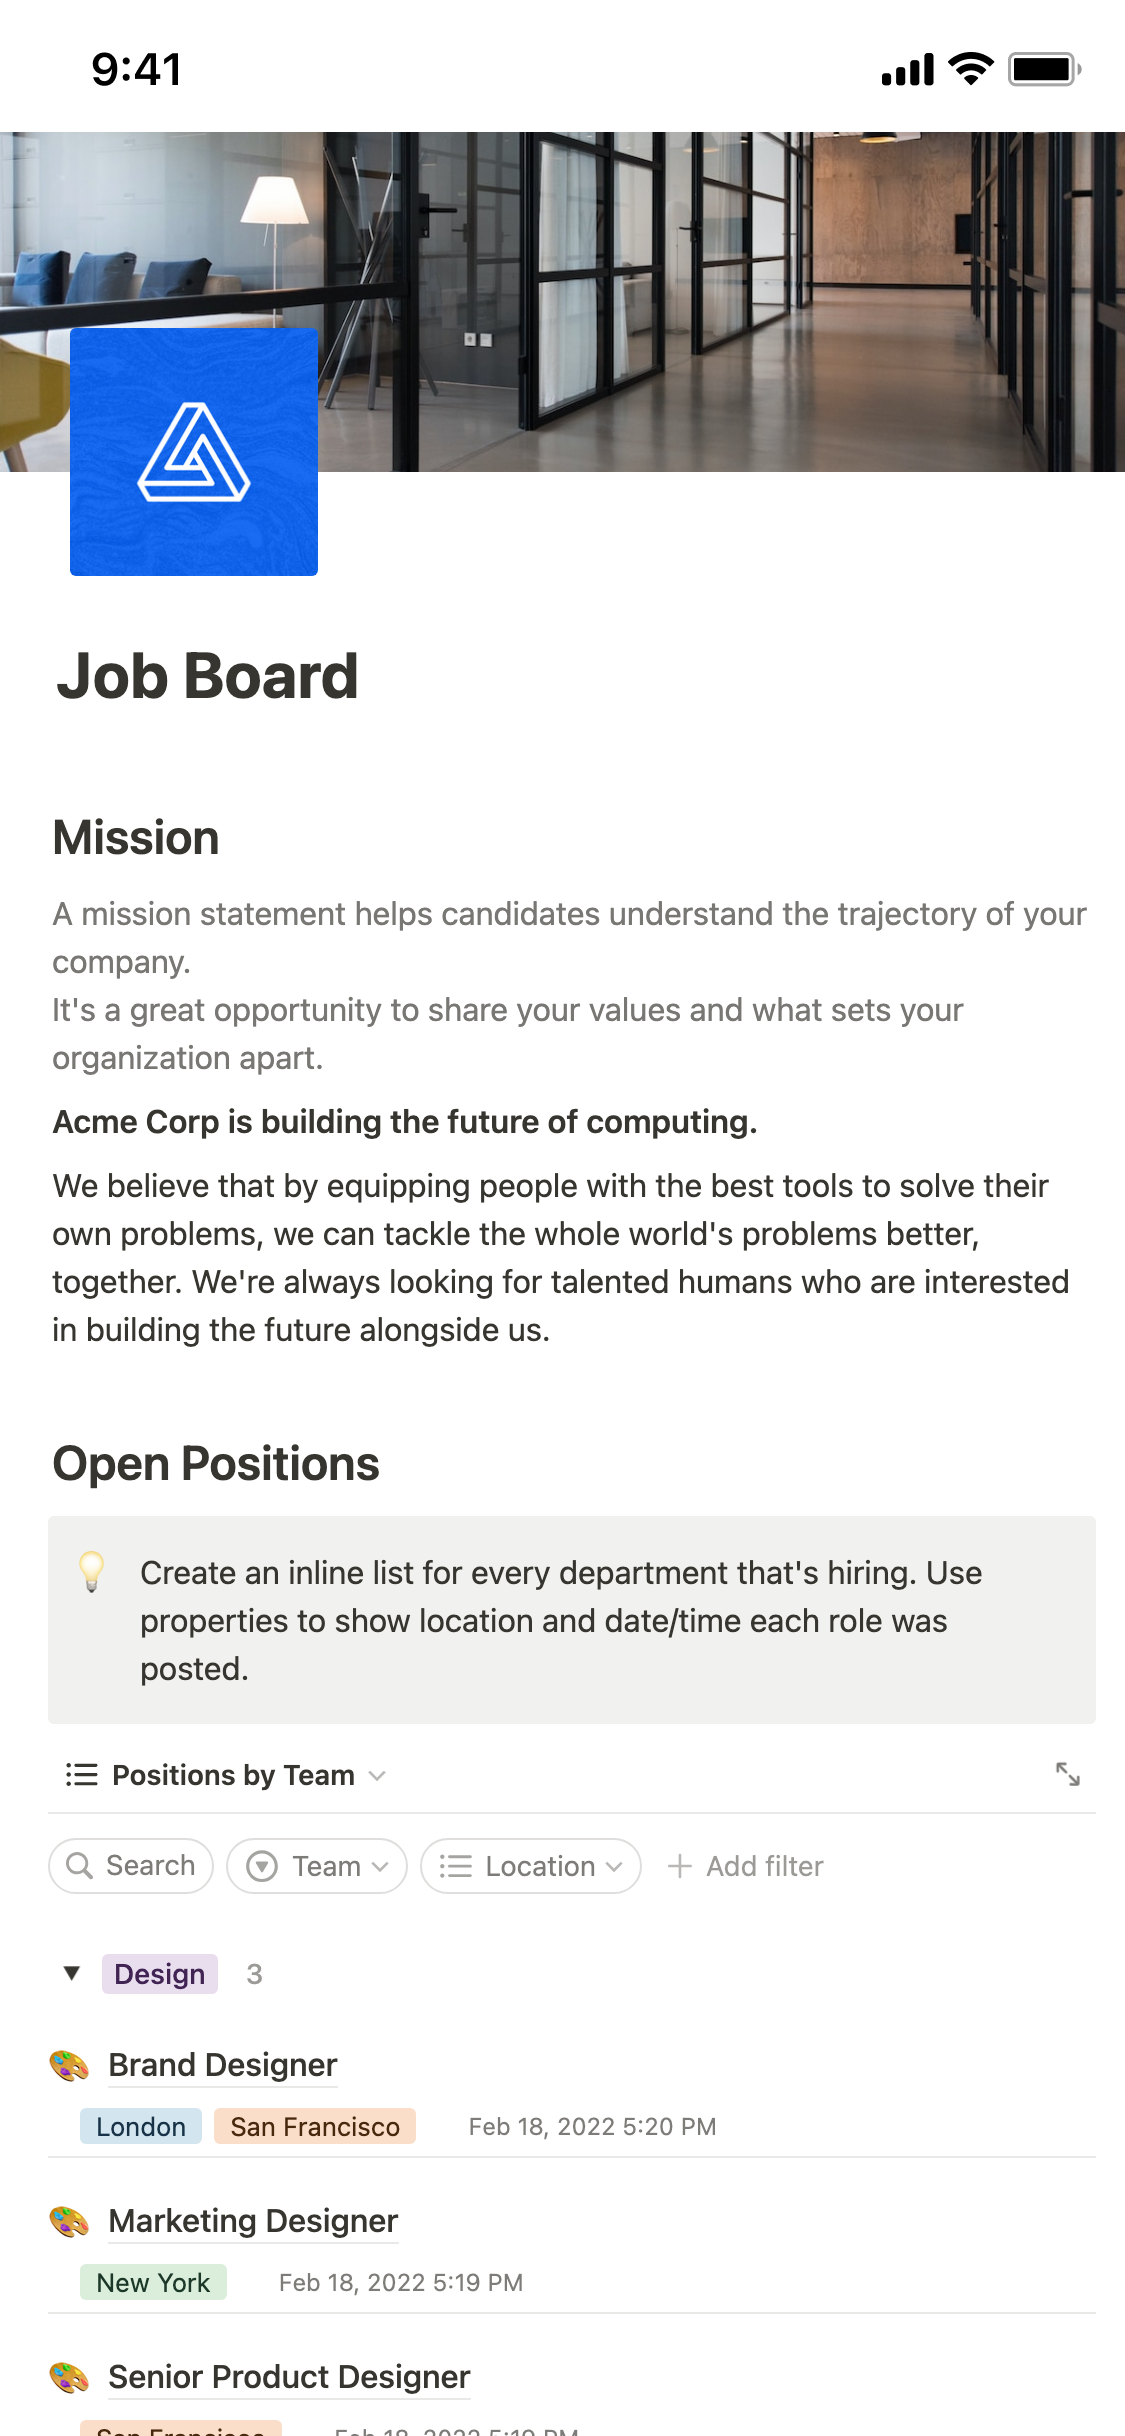 The mobile image for the Job board template